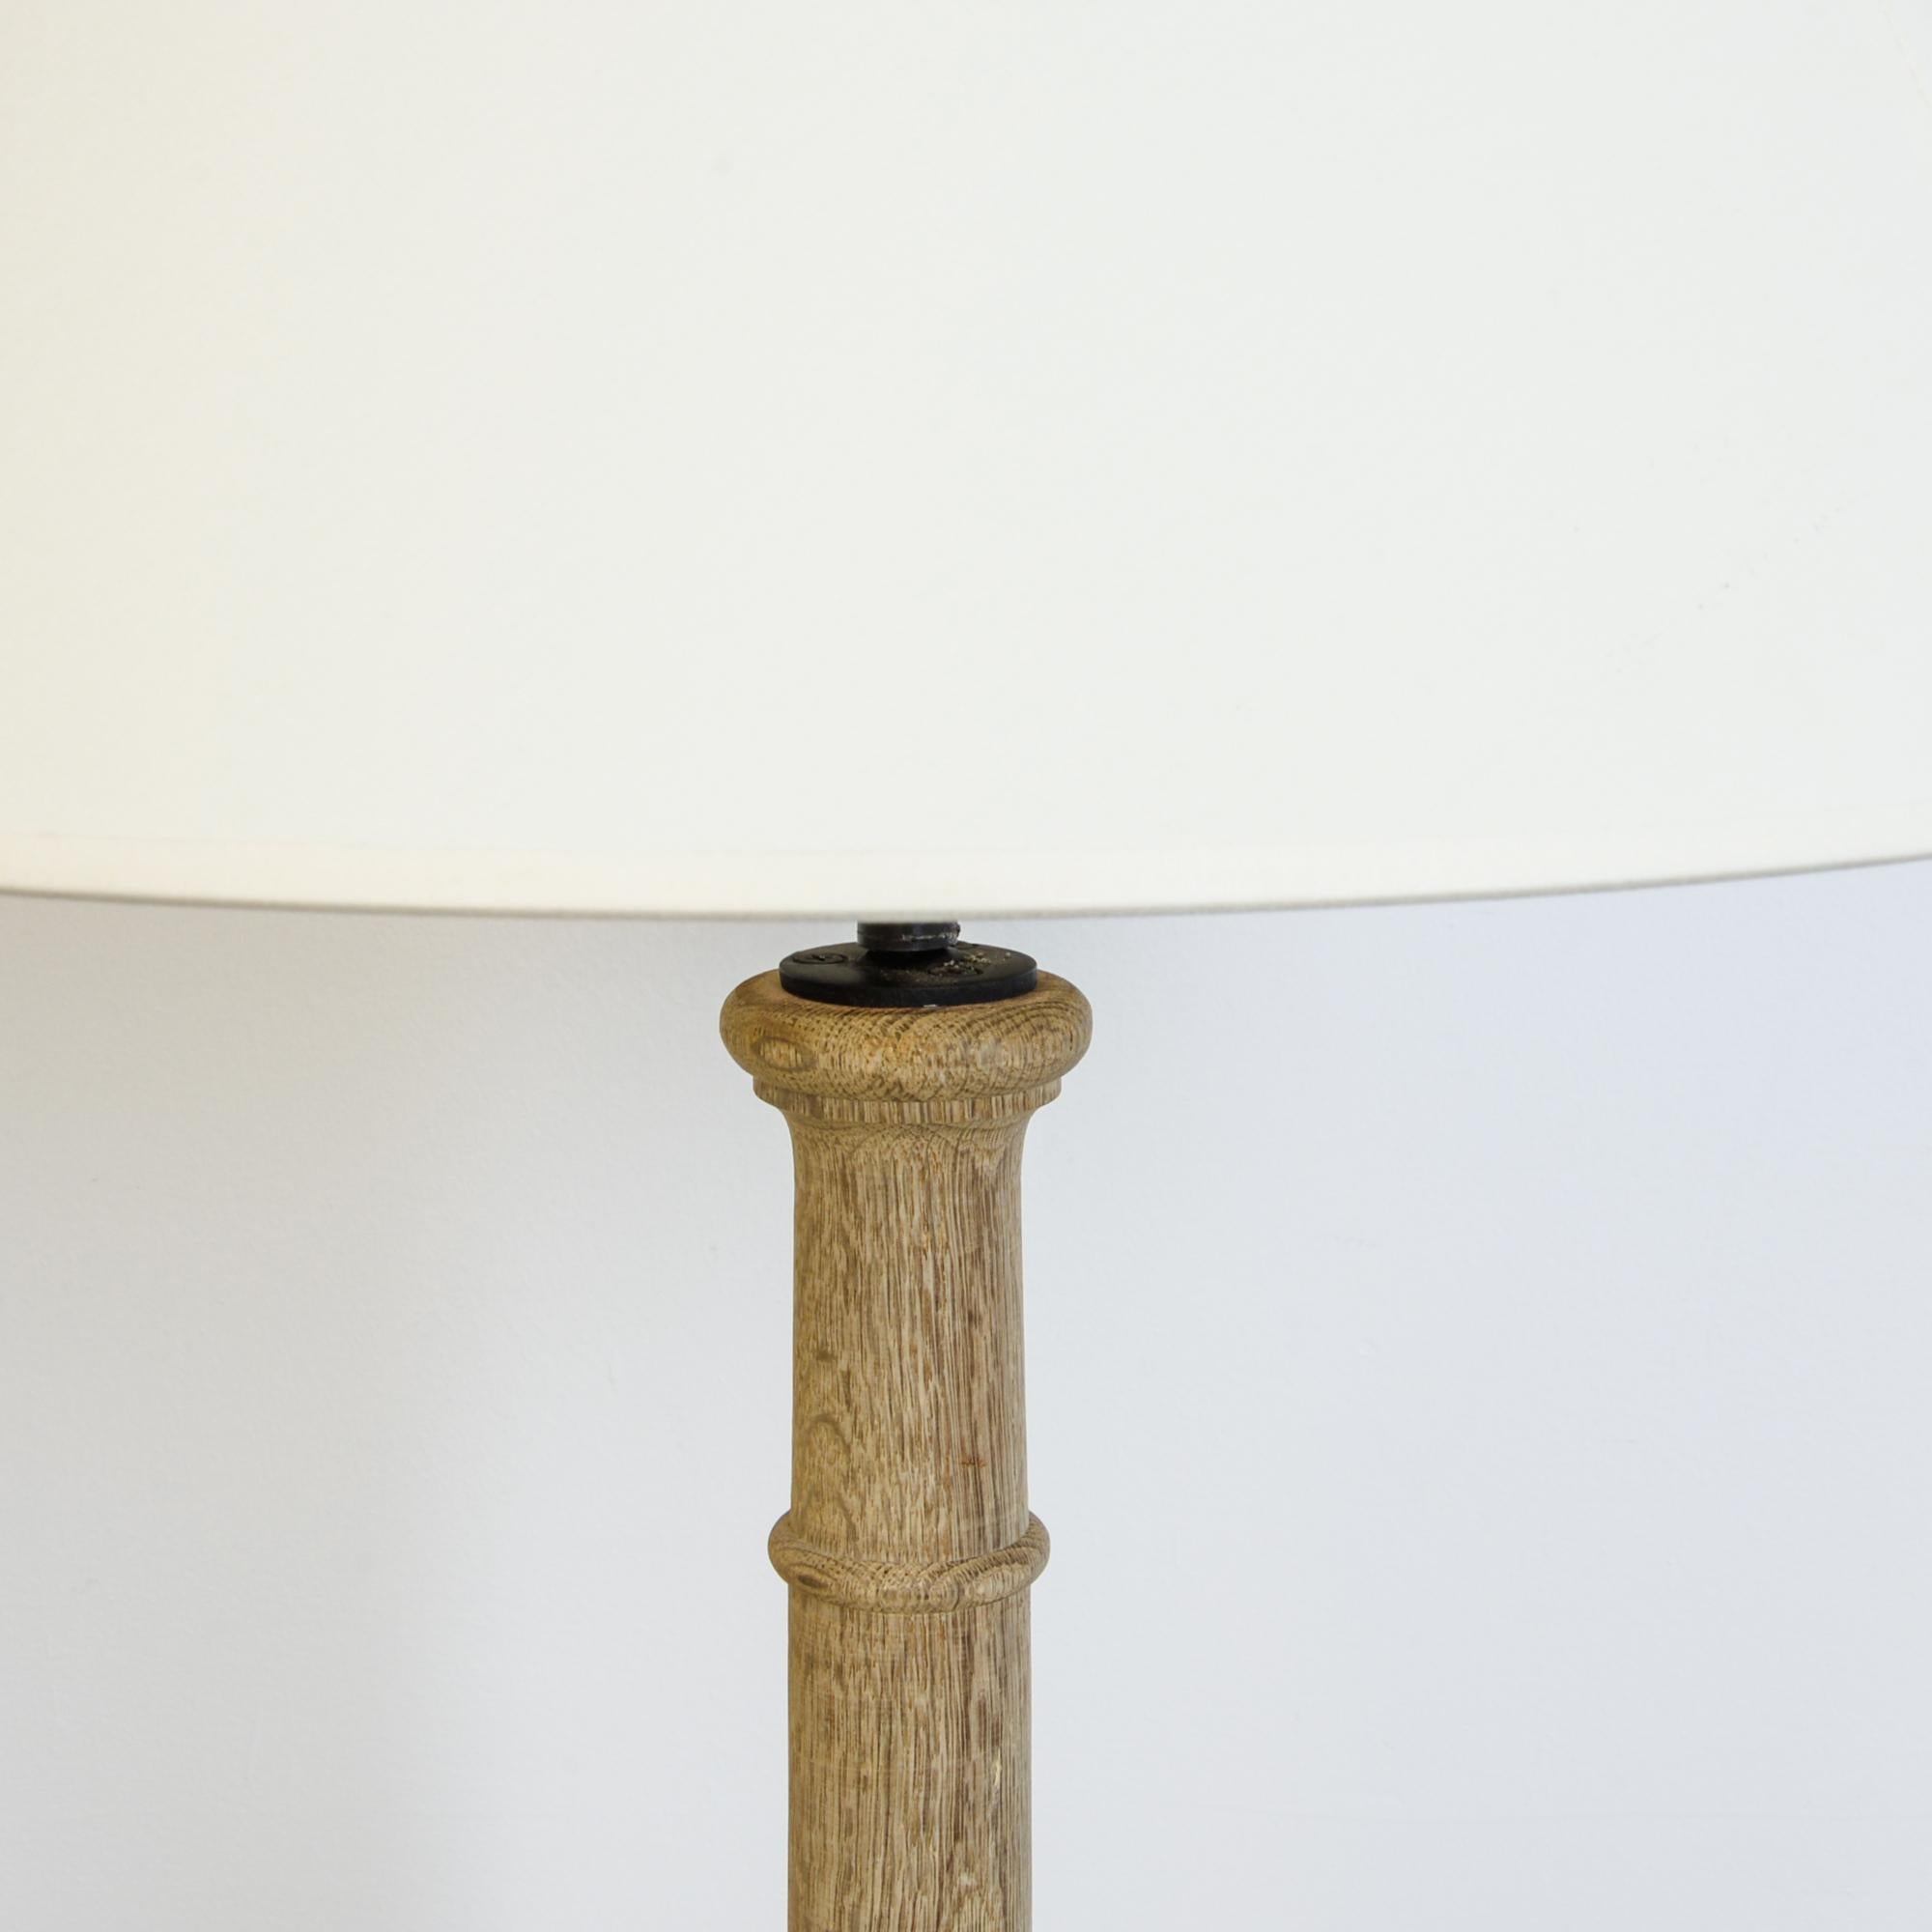 From France circa 1900, this lamp is constructed from an antique wooden plinth, updated with modern electrical wiring. With a classical influence, this elegant column is turned from cold- growth oak, a beautiful dense wood, and framed with a small